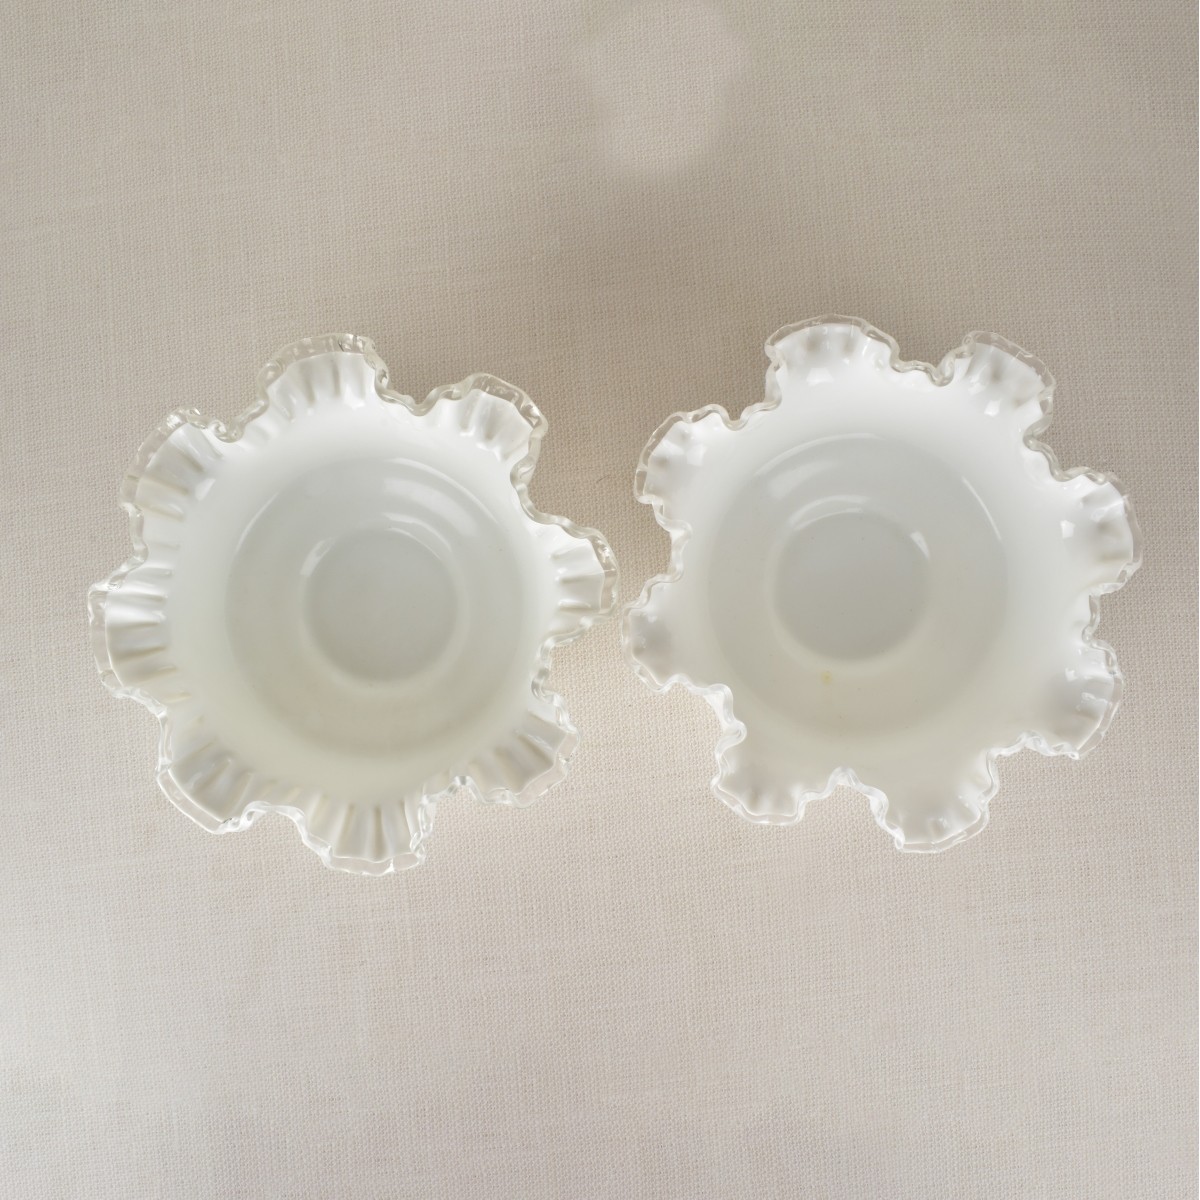 Two Fenton "Spanish Lace Silver Crest" Bowls